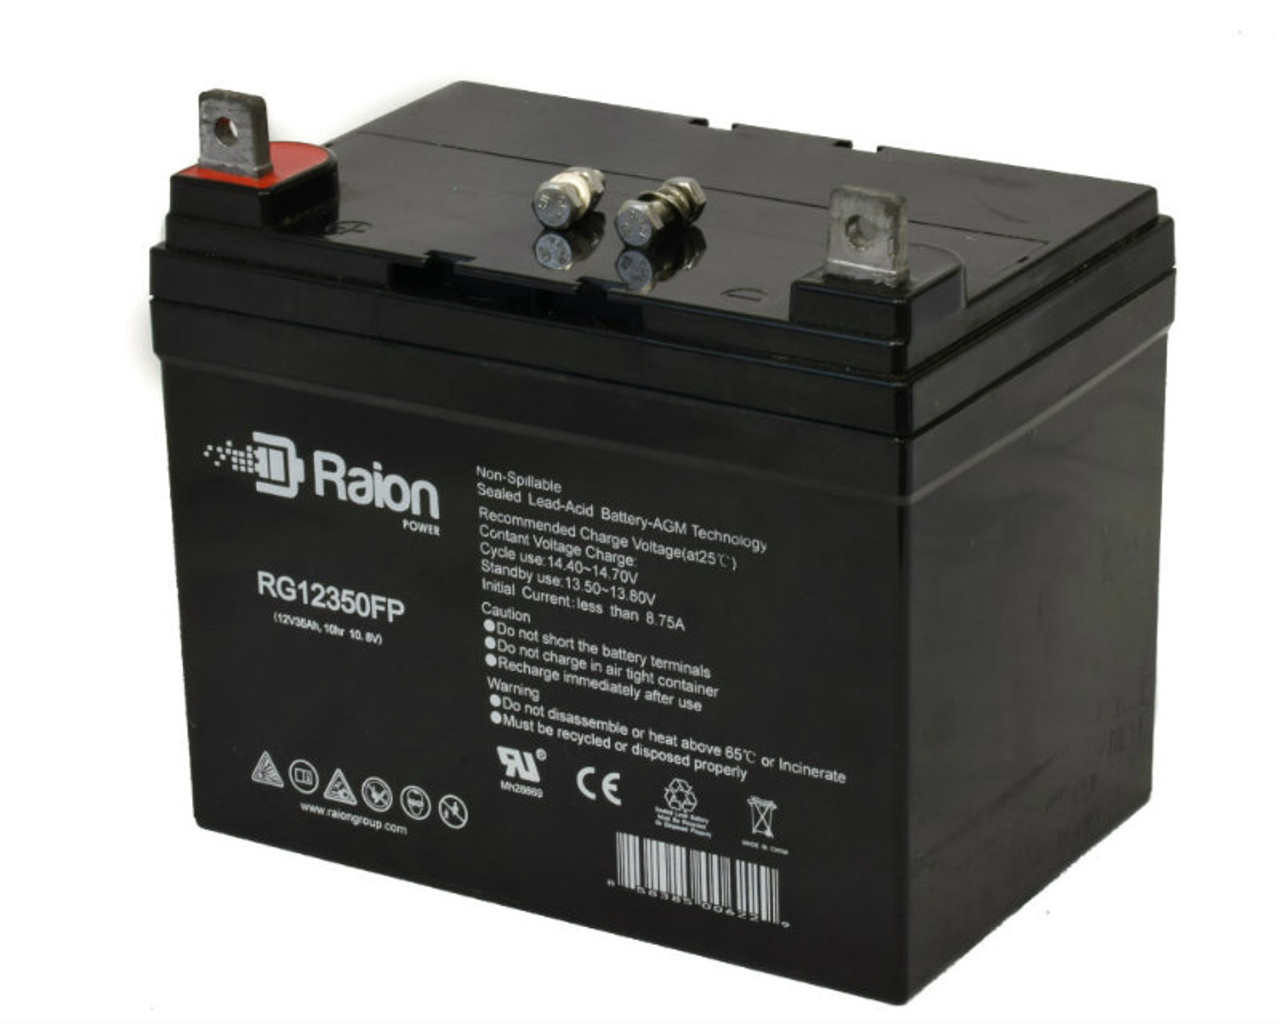 Raion Power Replacement 12V 35Ah RG12350FP Mobility Scooter Battery for Mega Motion Travel King MM114R